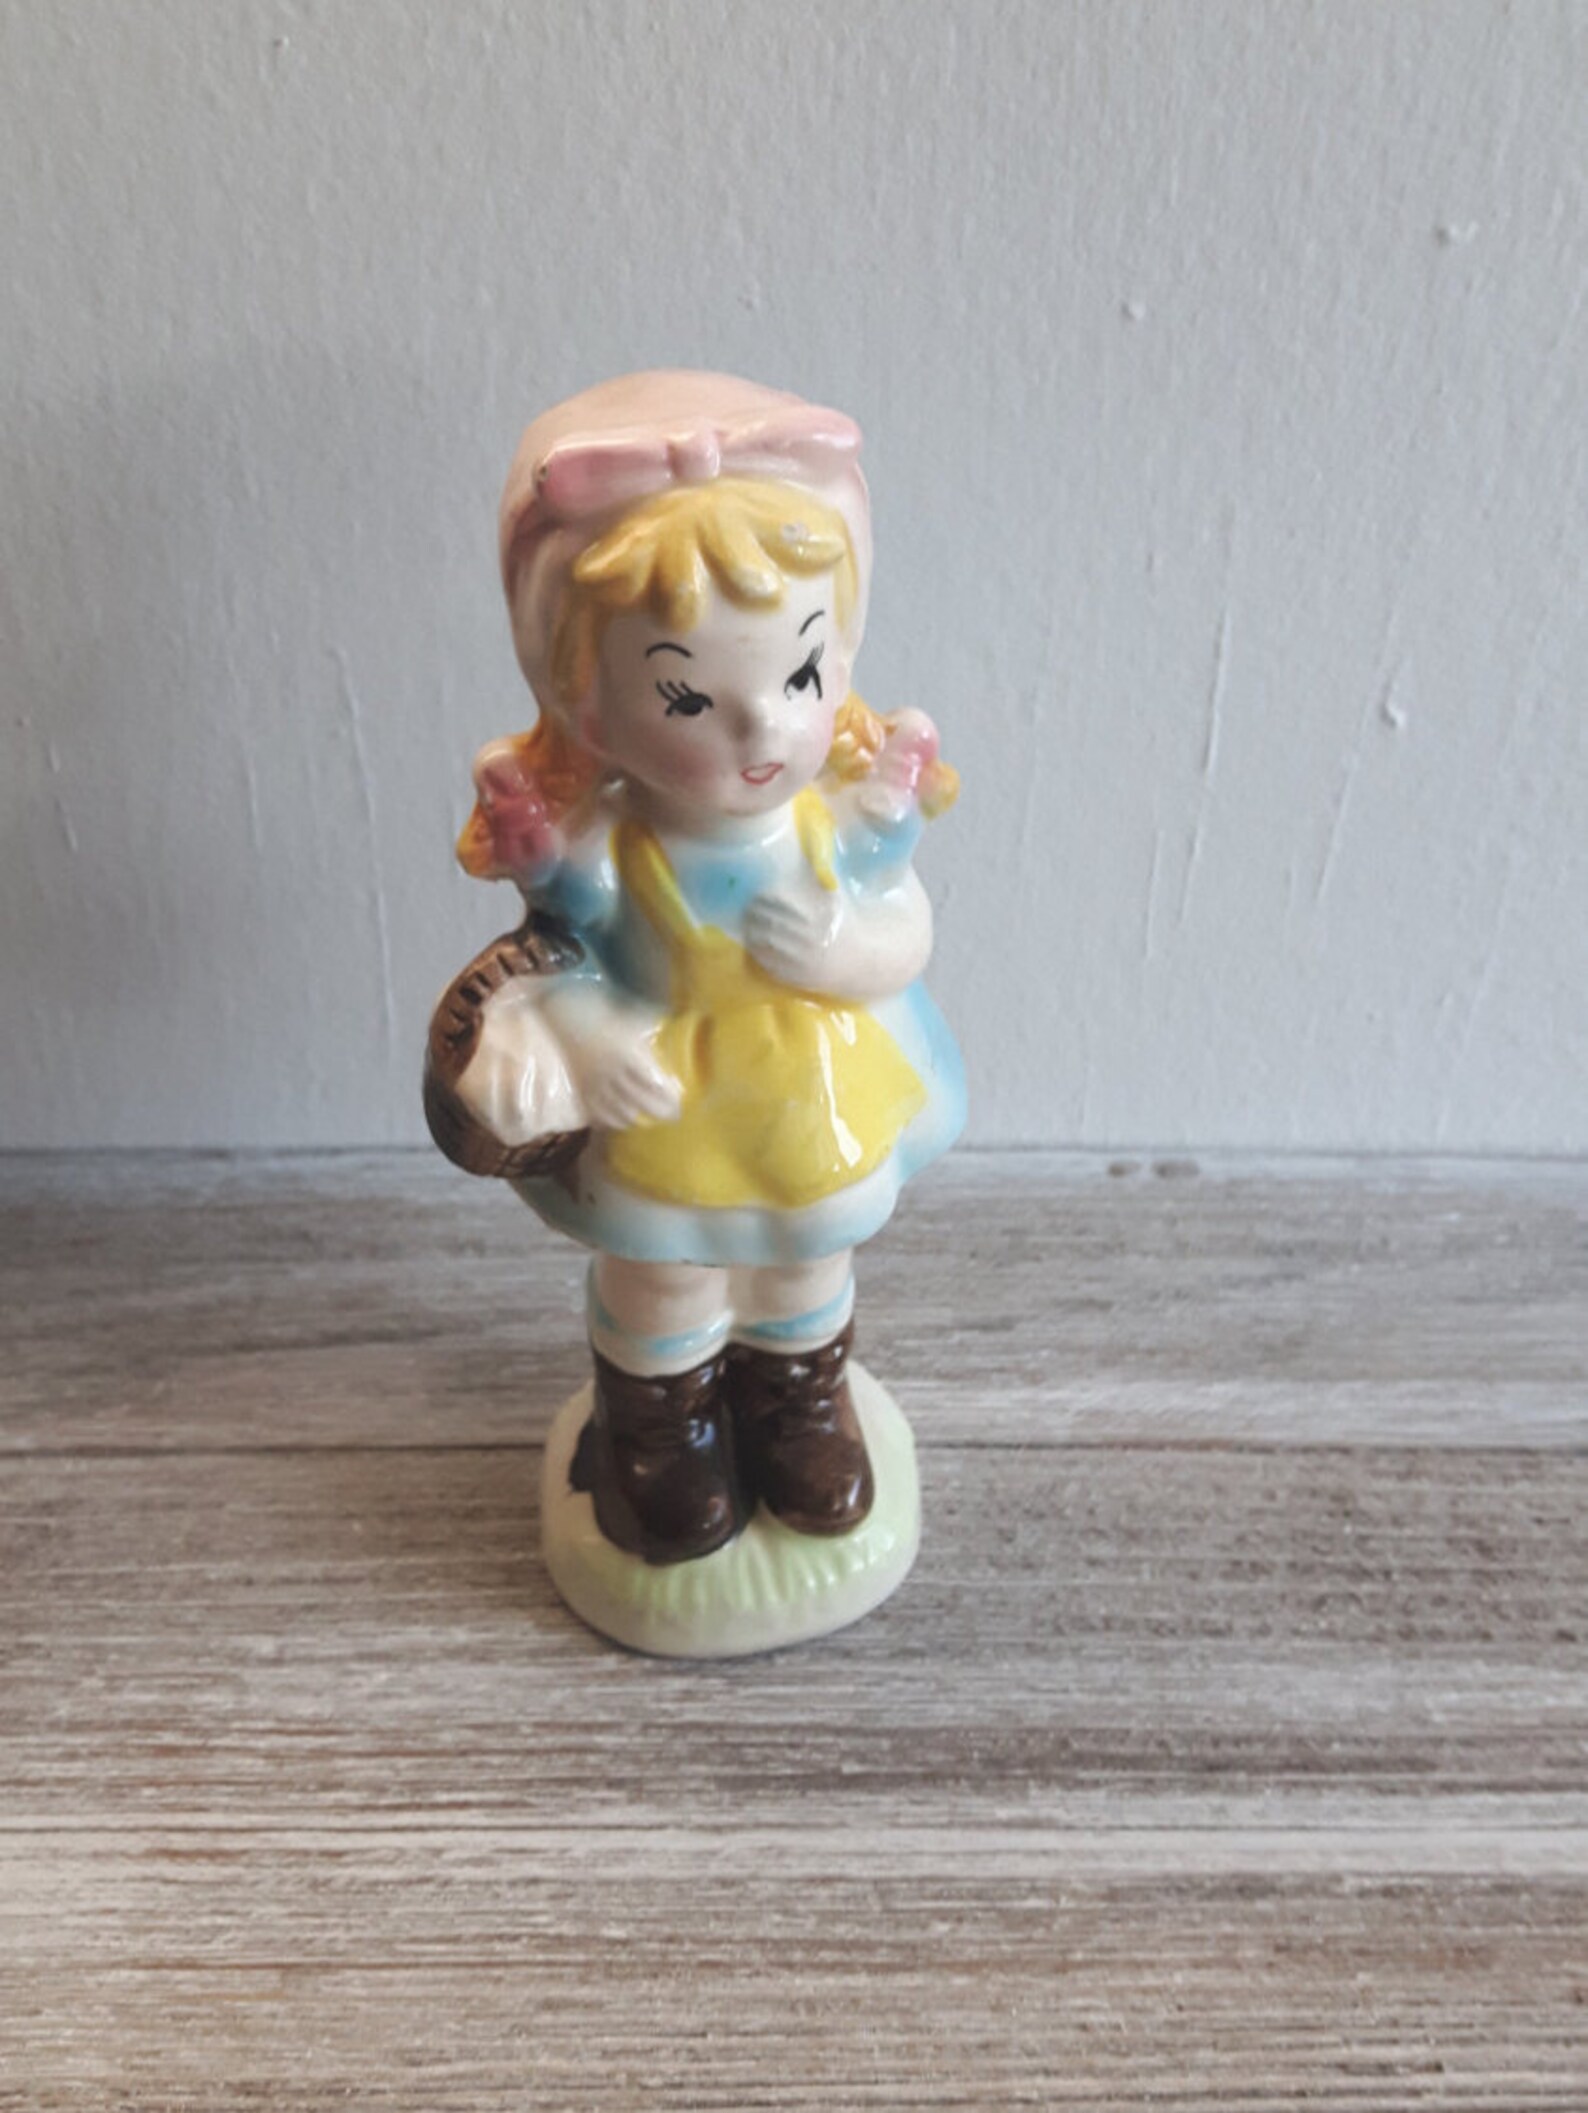 Vintage Girl Figurine Farm Hand Girl With Basket. Made in - Etsy